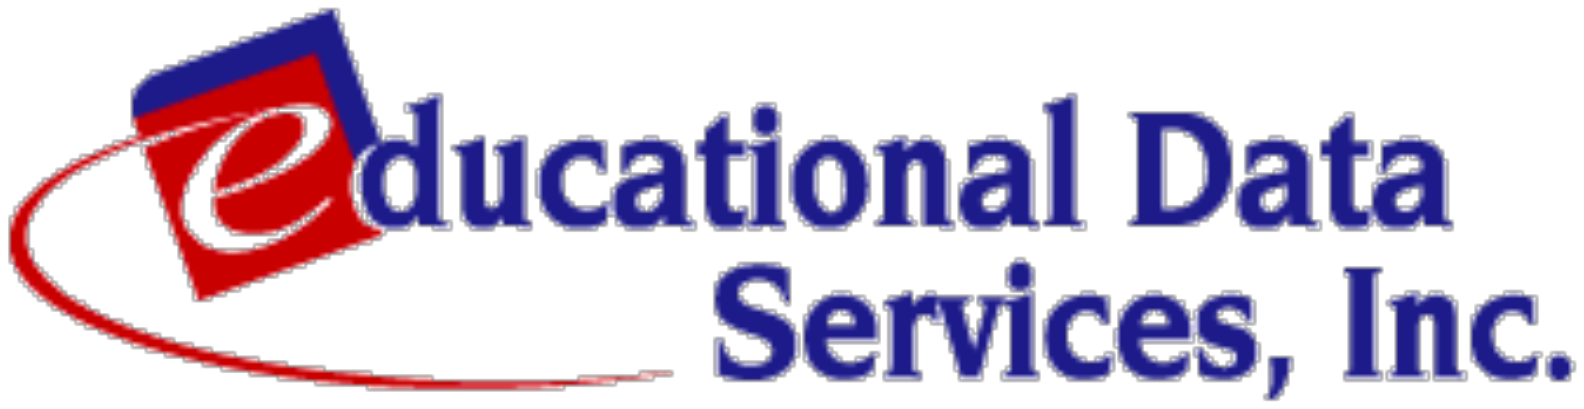 EducationServices_Logo